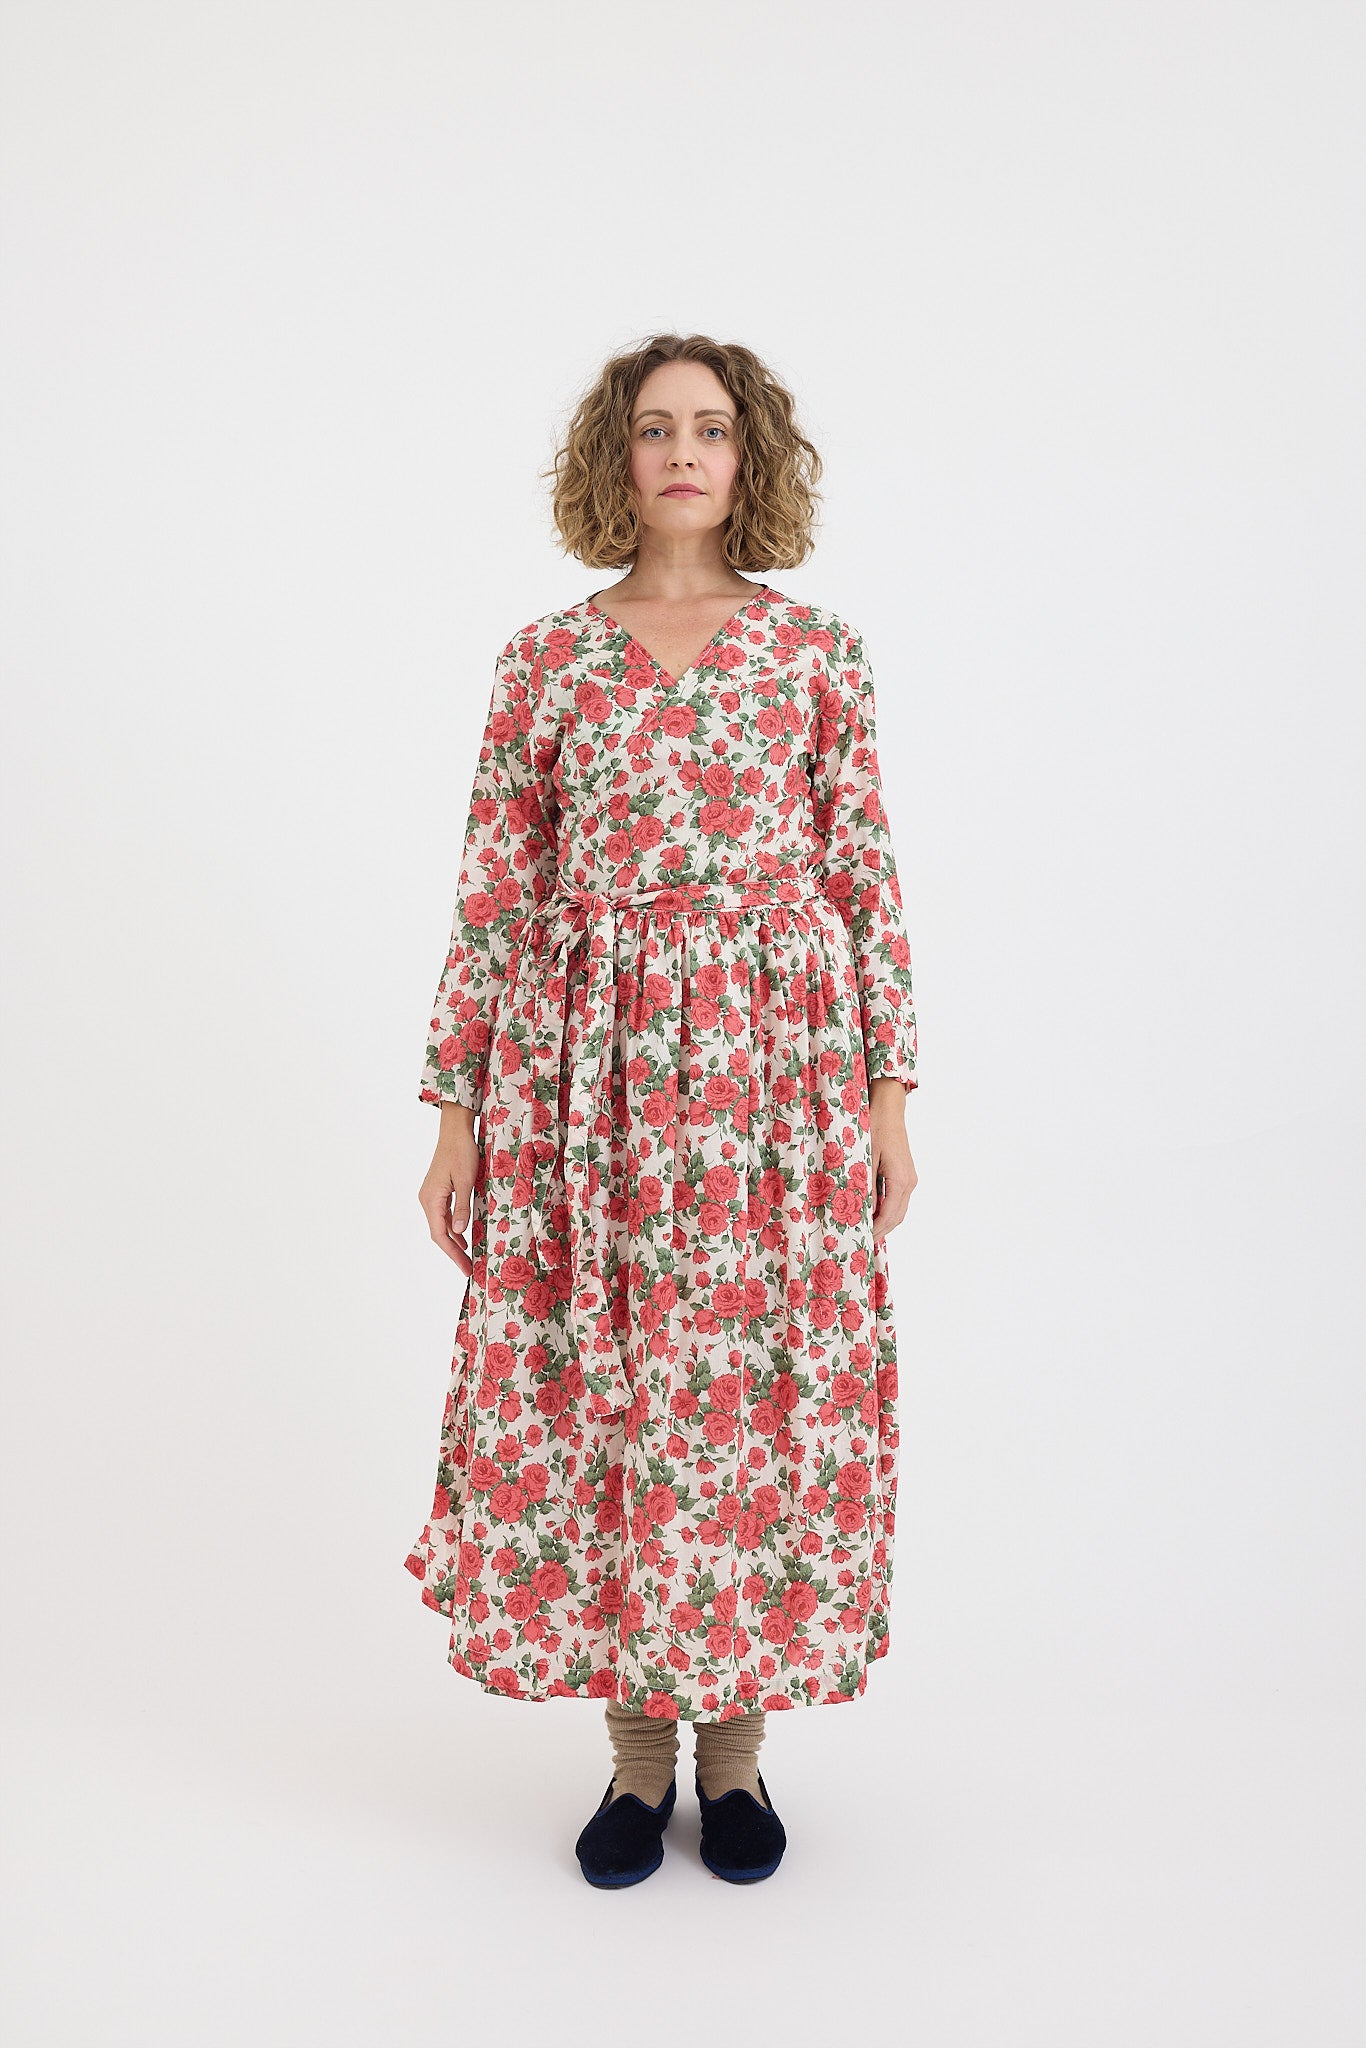 Carline Crossover Dress - Liberty Of London Cotton - Melbourne Made